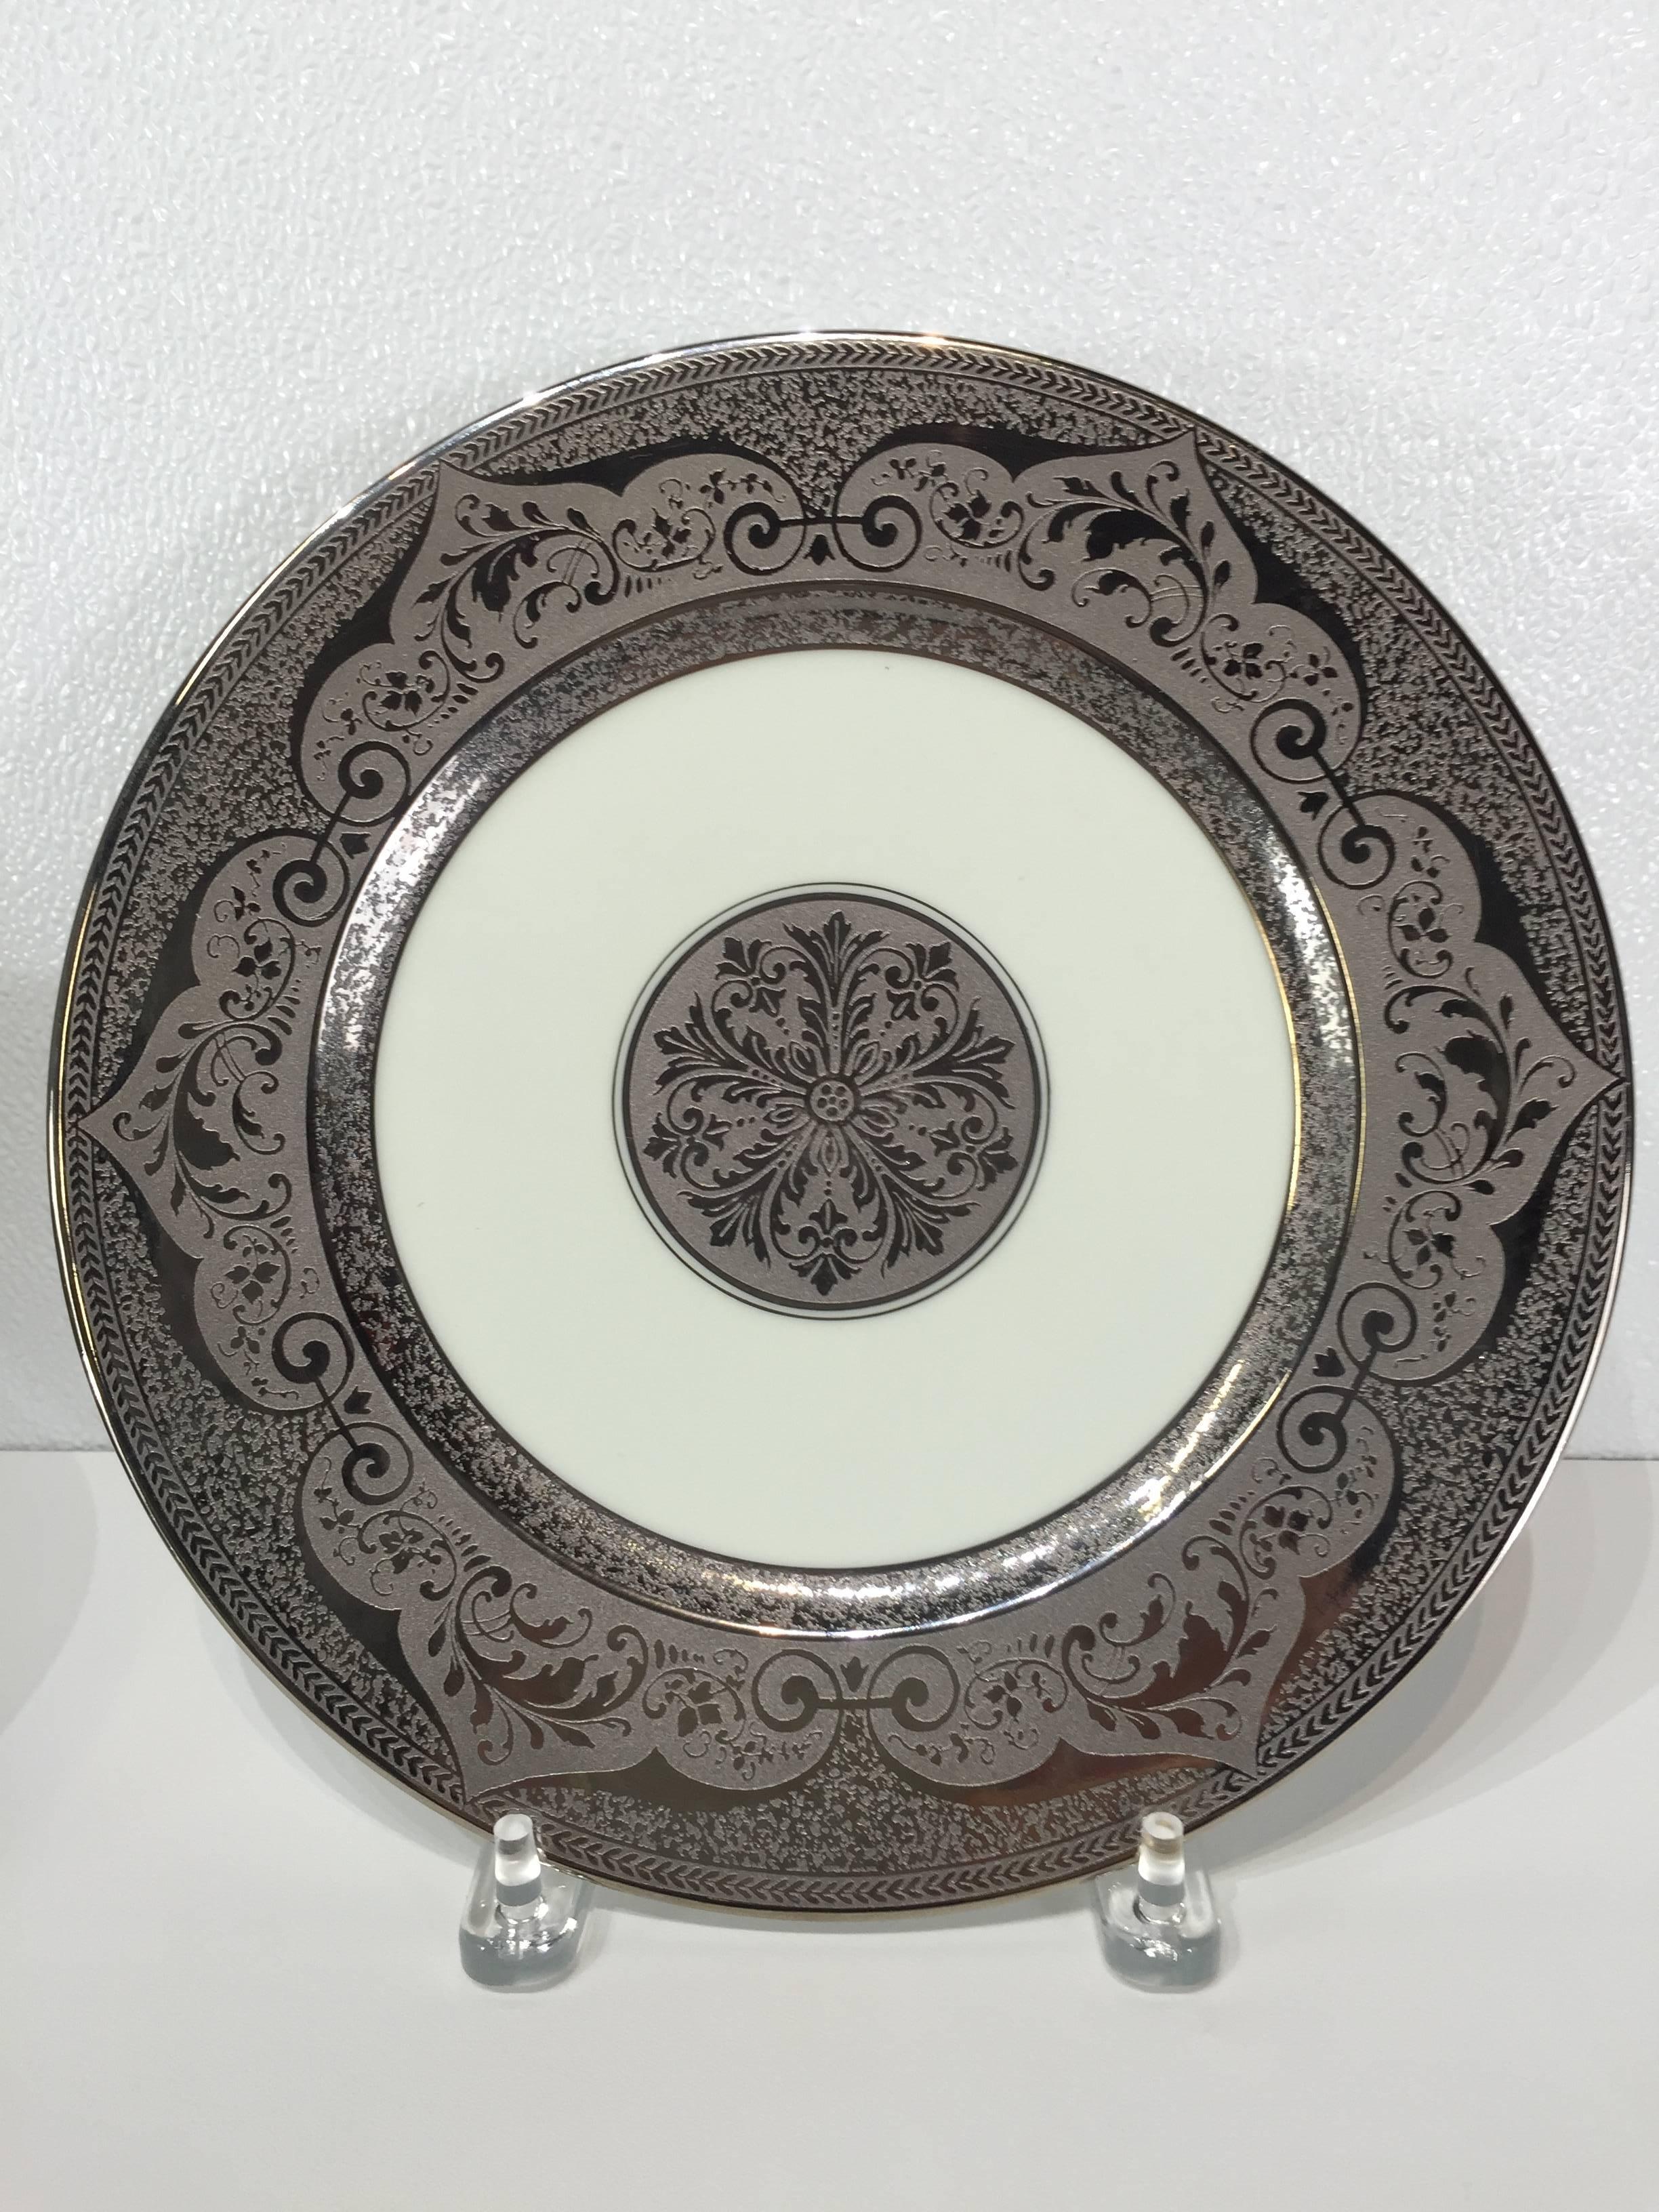 12 platinum  encrusted service plates, by Heinrich and Co., with rich 2.5